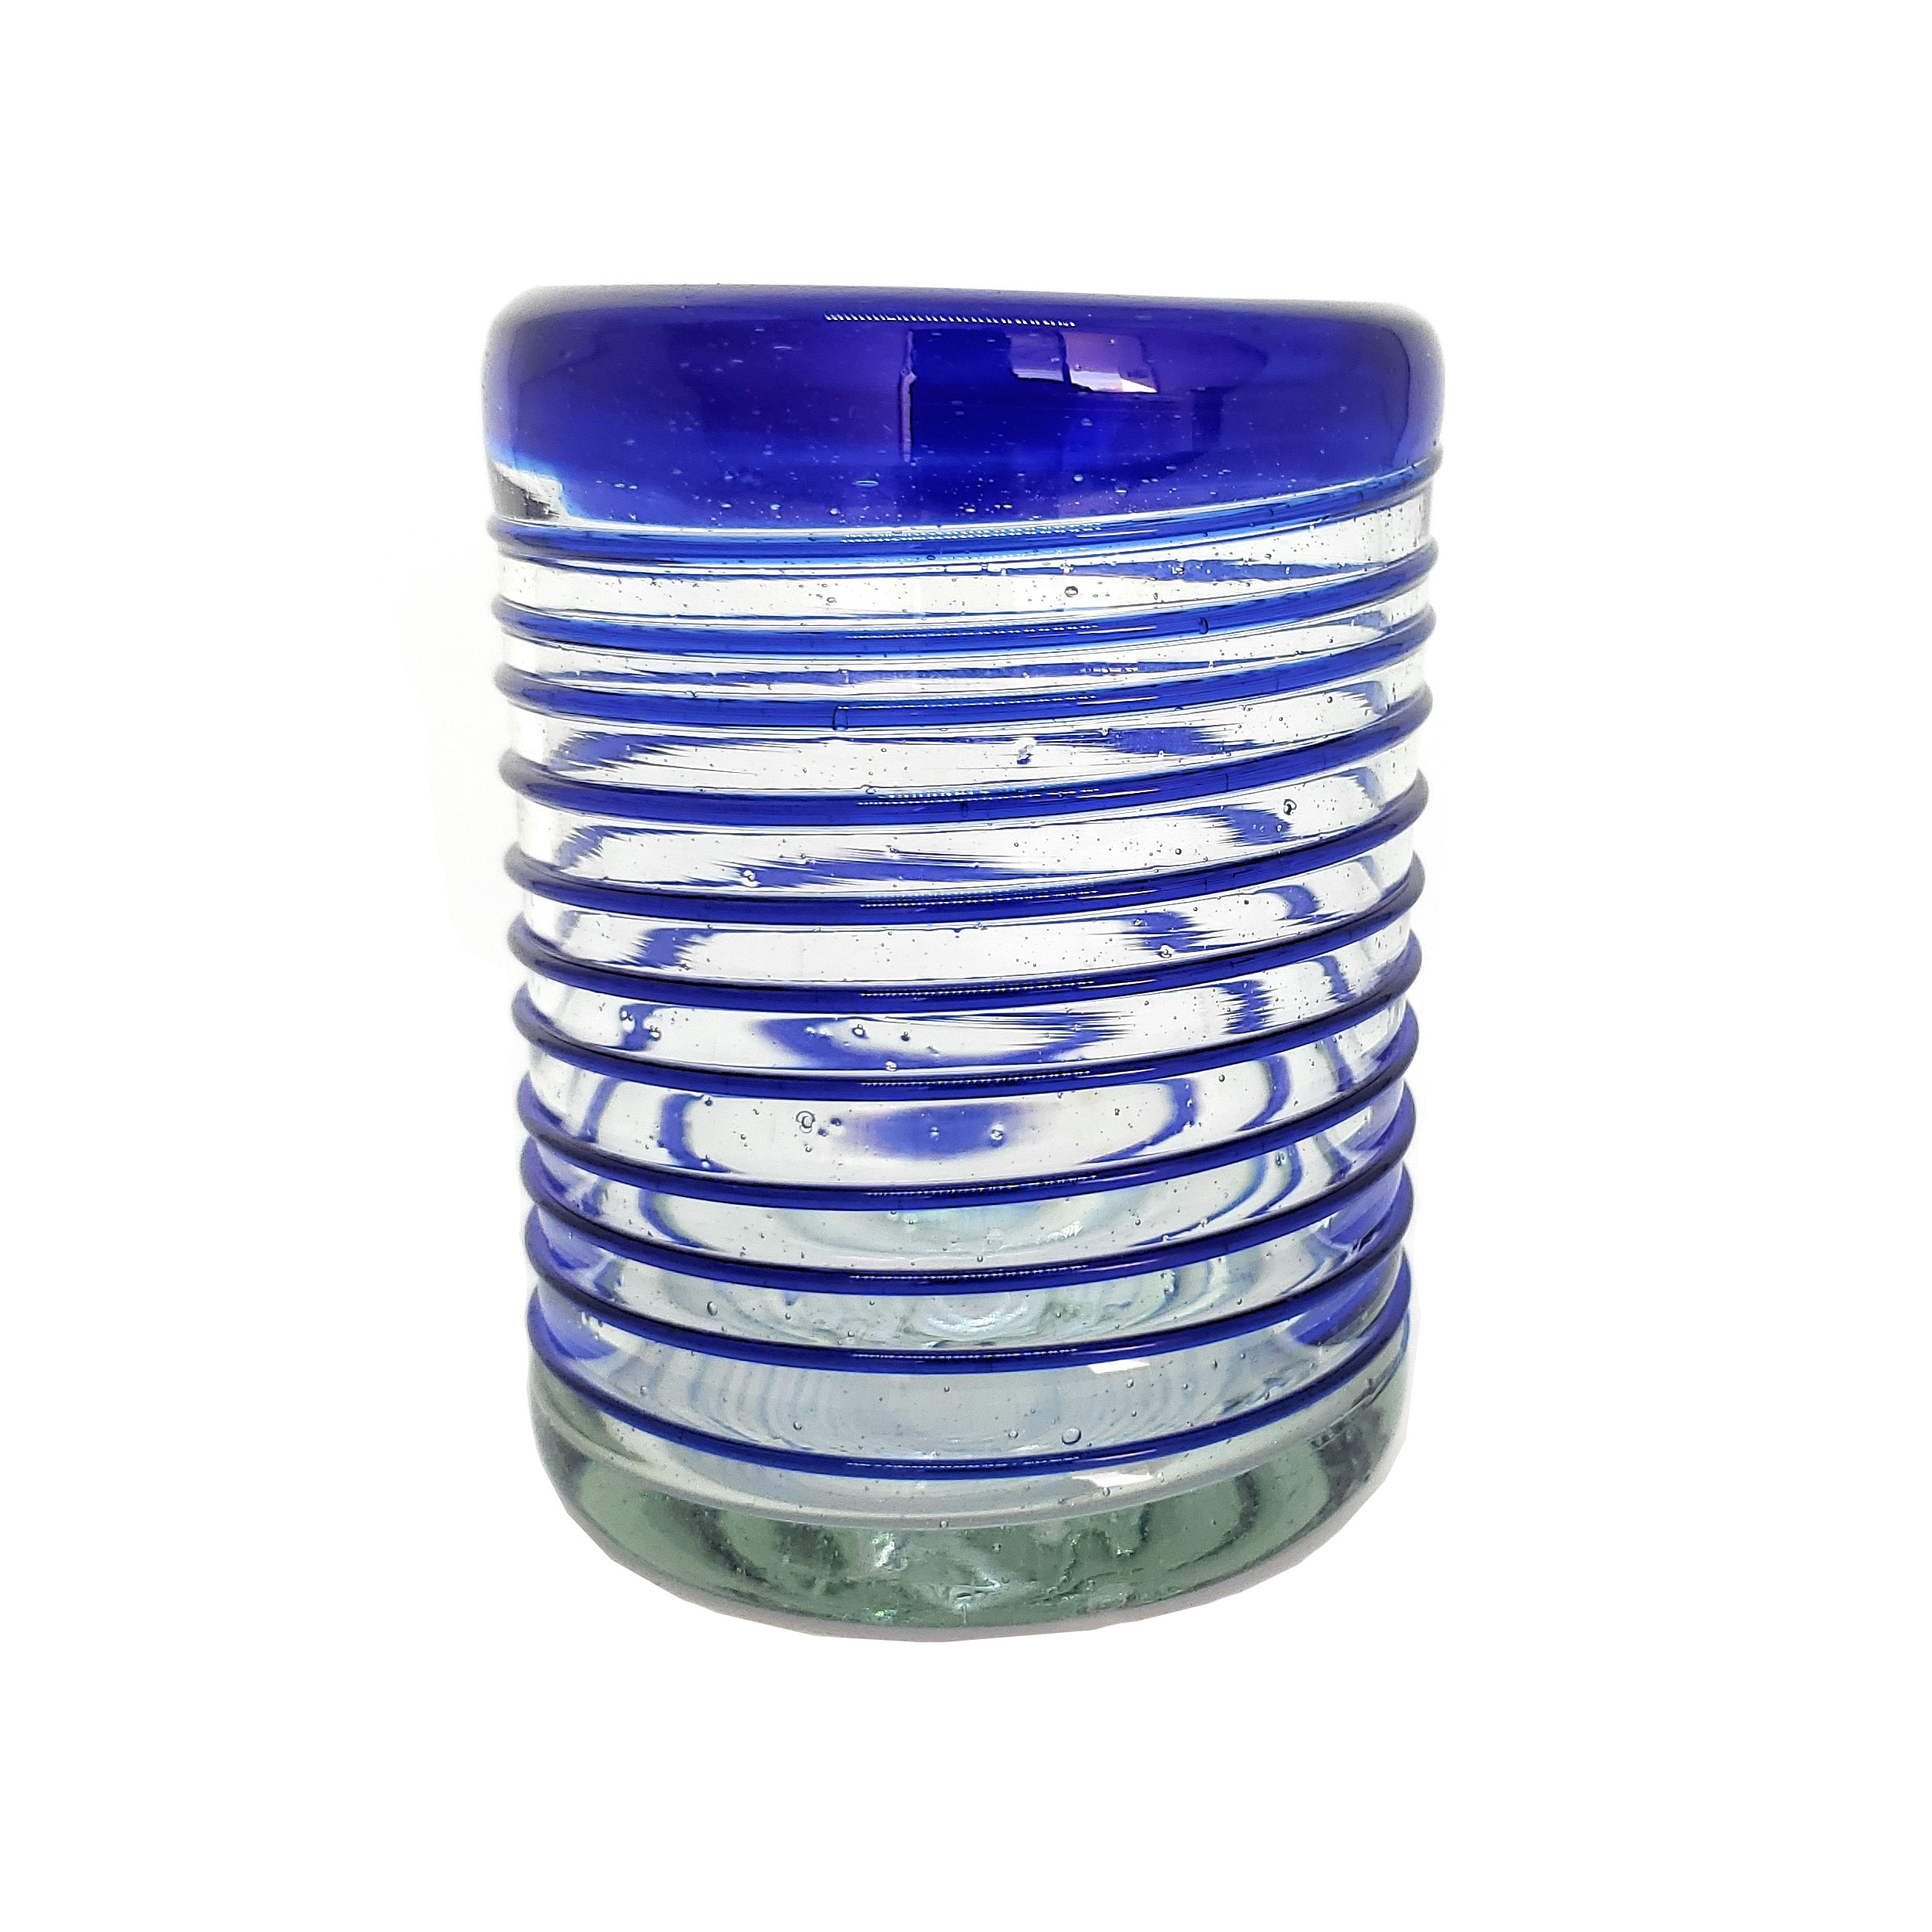 Sale Items / Cobalt Blue Spiral 10 oz Tumblers (set of 6) / This festive set of tumblers is great for a glass of milk with cookies or a lemonade on a hot summer day.